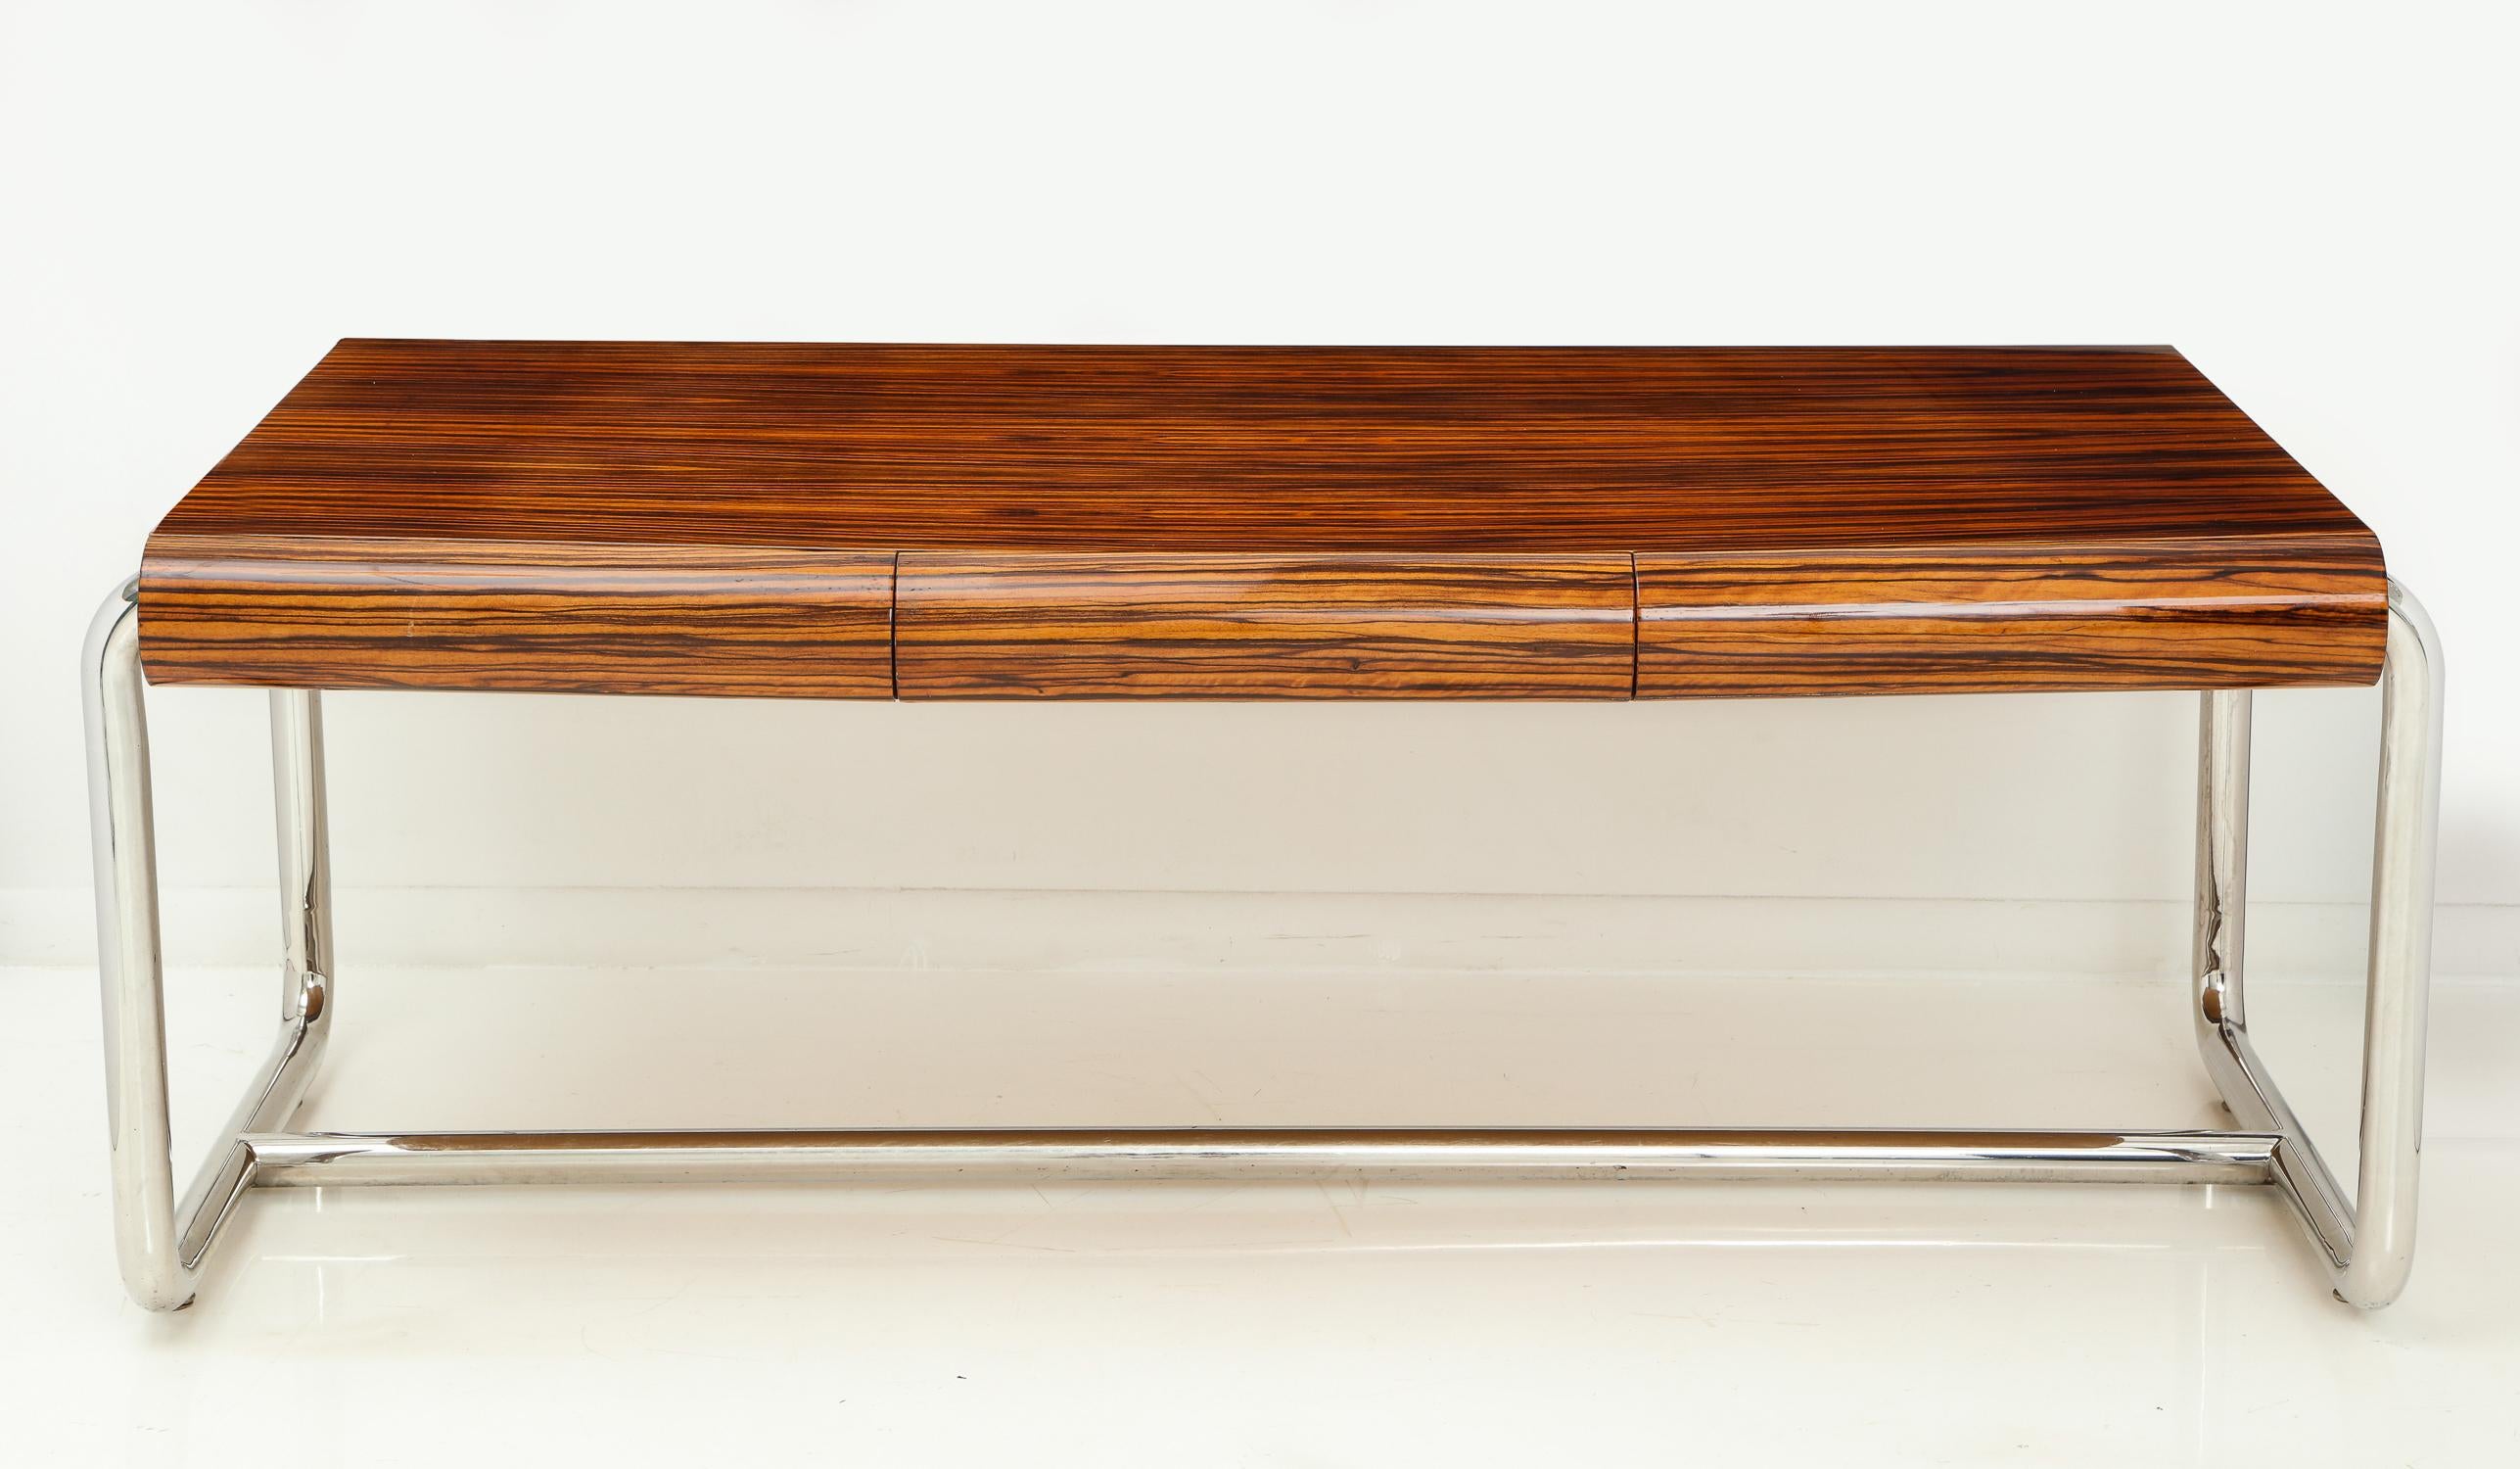 Impressive executive desk in Macassar ebony and chrome with solid oak secondary wood in the drawers. A Leon Rosen design for the Pace Collection, circa 1980s. Uncommon in Macassar. The original hard urethane finish is intact. It has been cleaned and